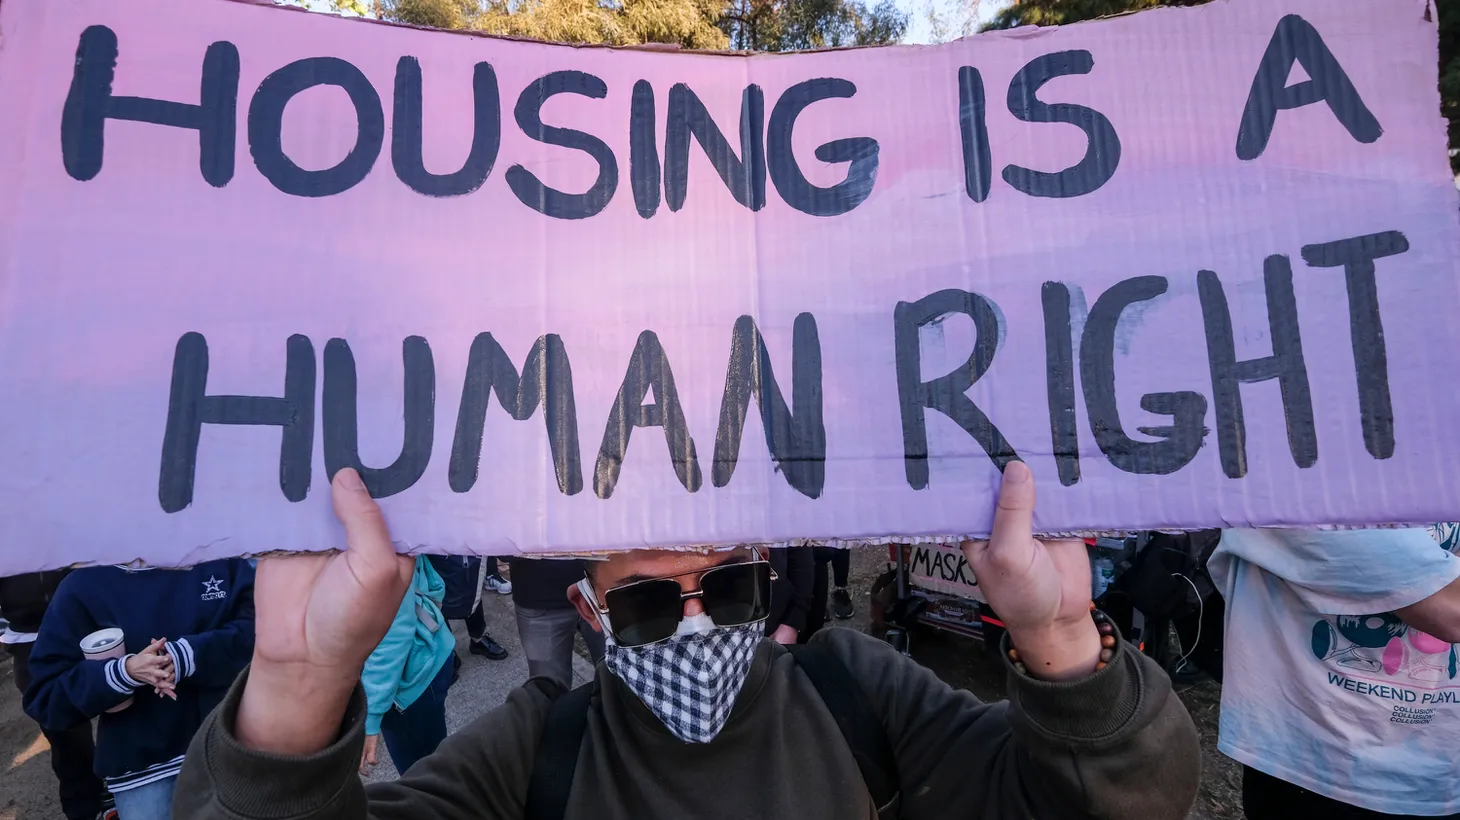 An activist holds a sign that says “housing is a human right,” at Echo Park Lake, March 24, 2021.